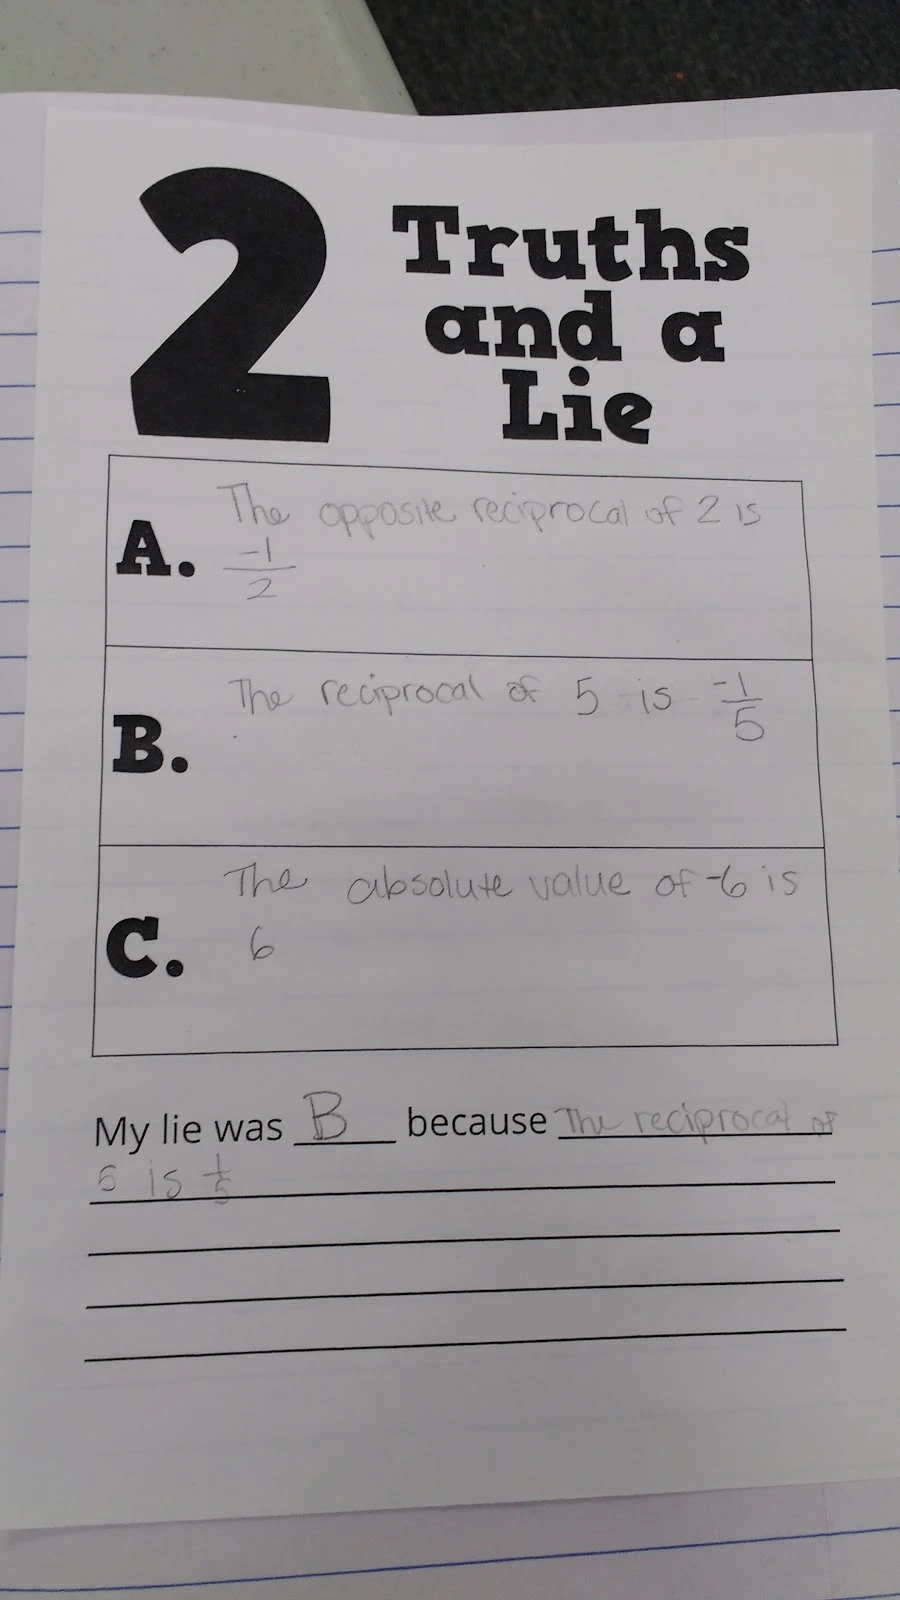 Two Truths and a Lie Template in Math Interactive Notebook